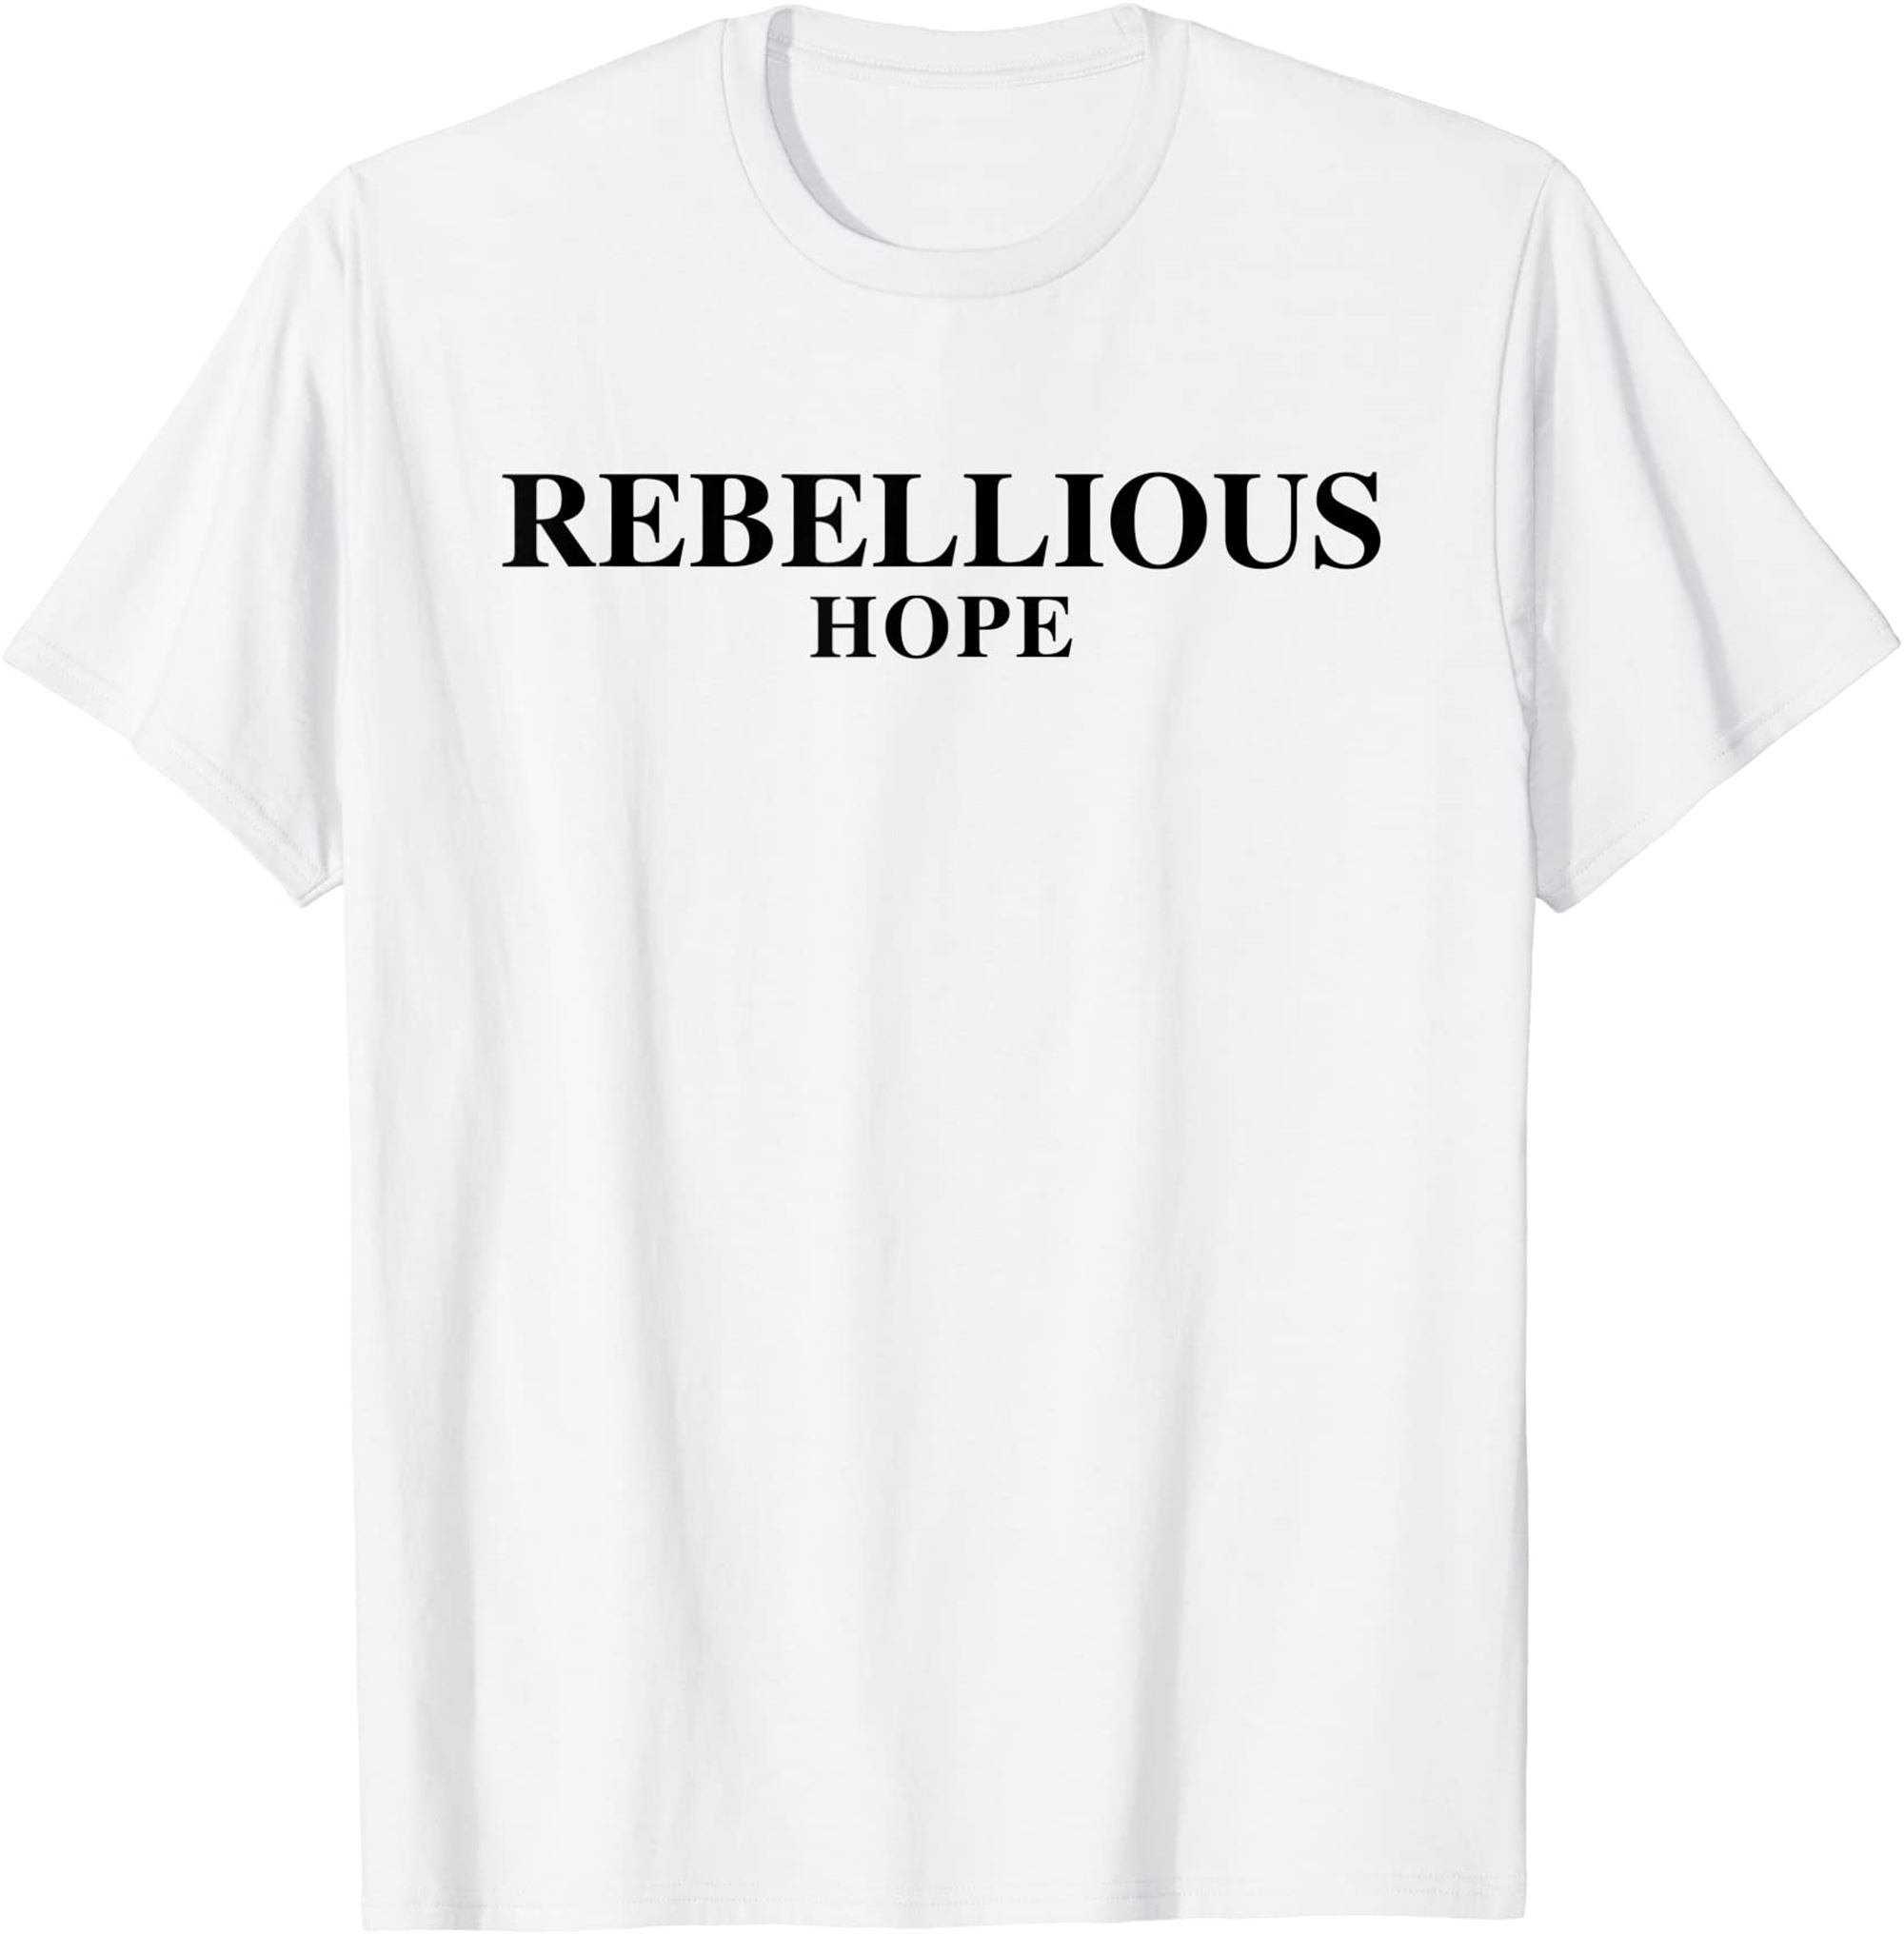 Rebellious Hope T-shirt Size Up To 5xl